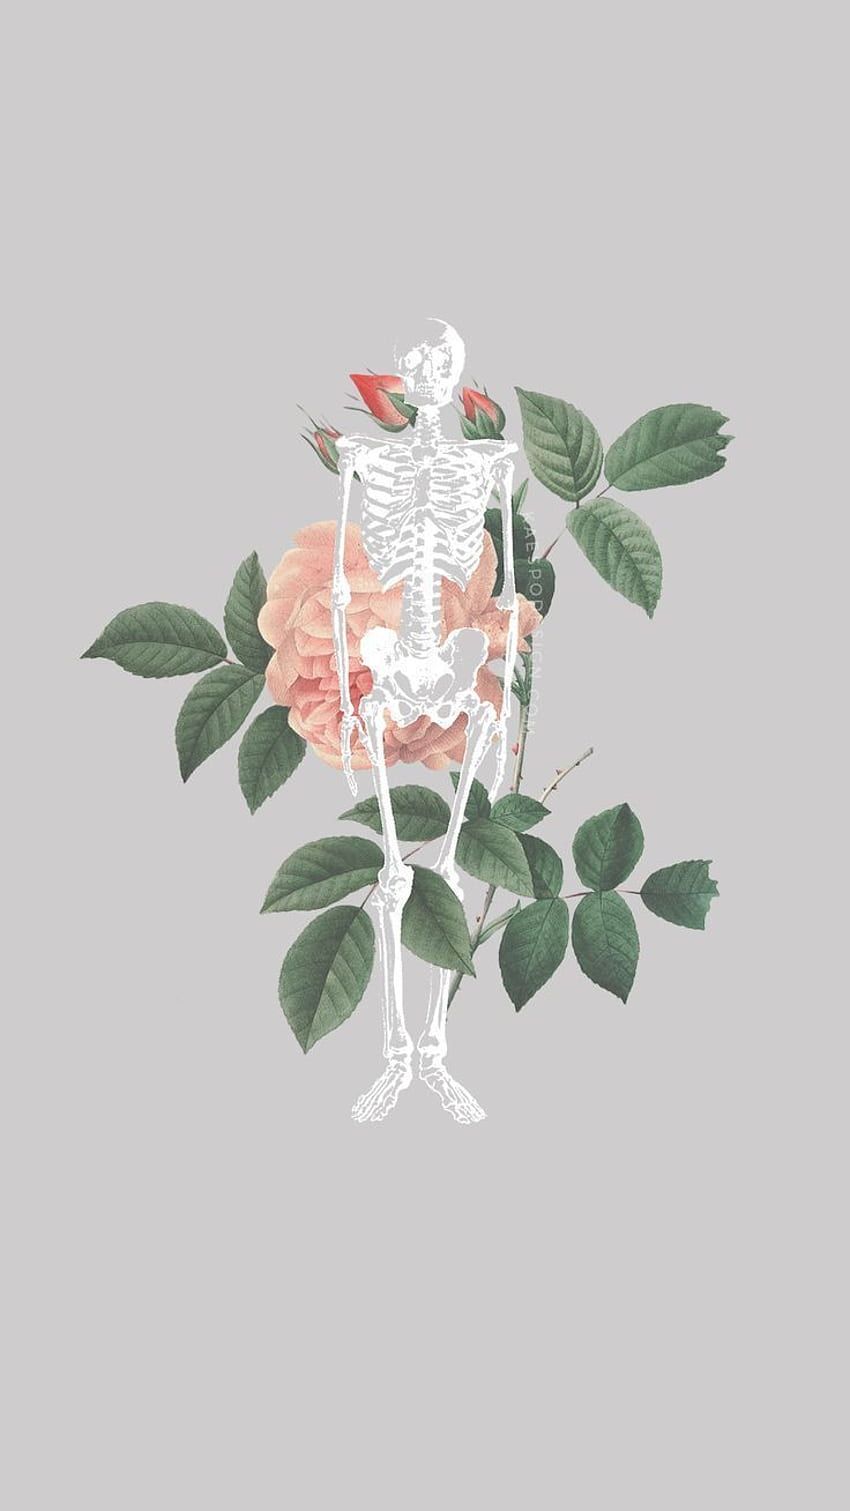 A skeleton holding a flower in its hands - Anatomy, medical, nurse